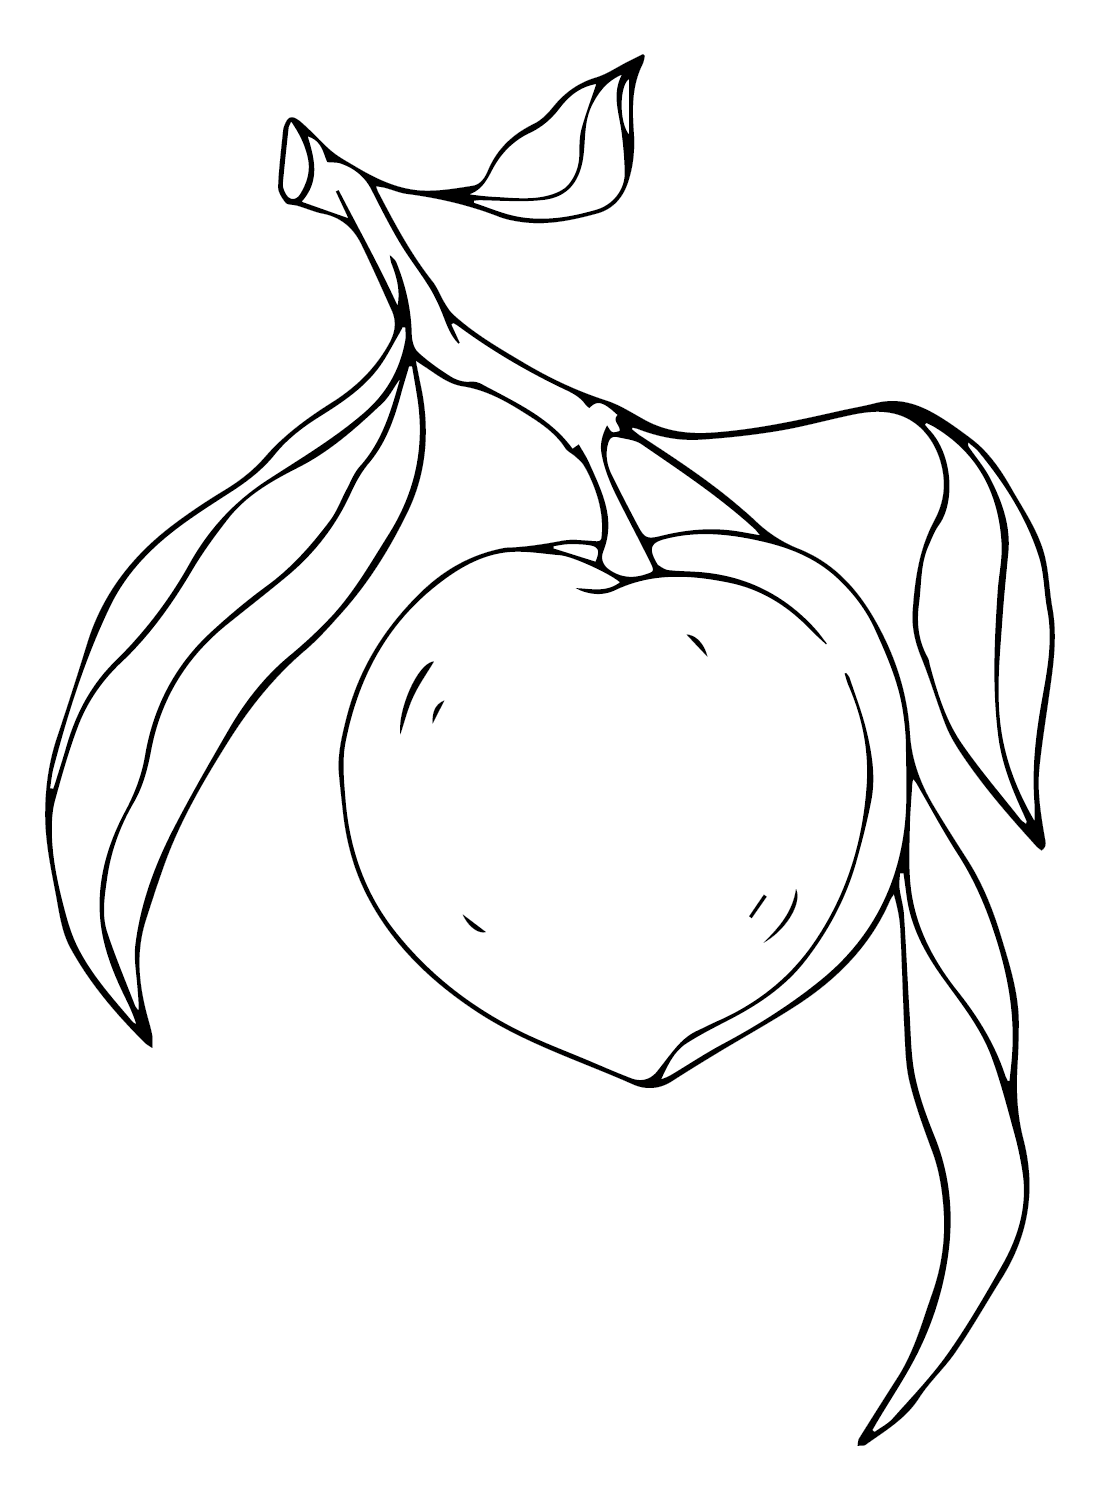 Nectarine Pictures Coloring Page